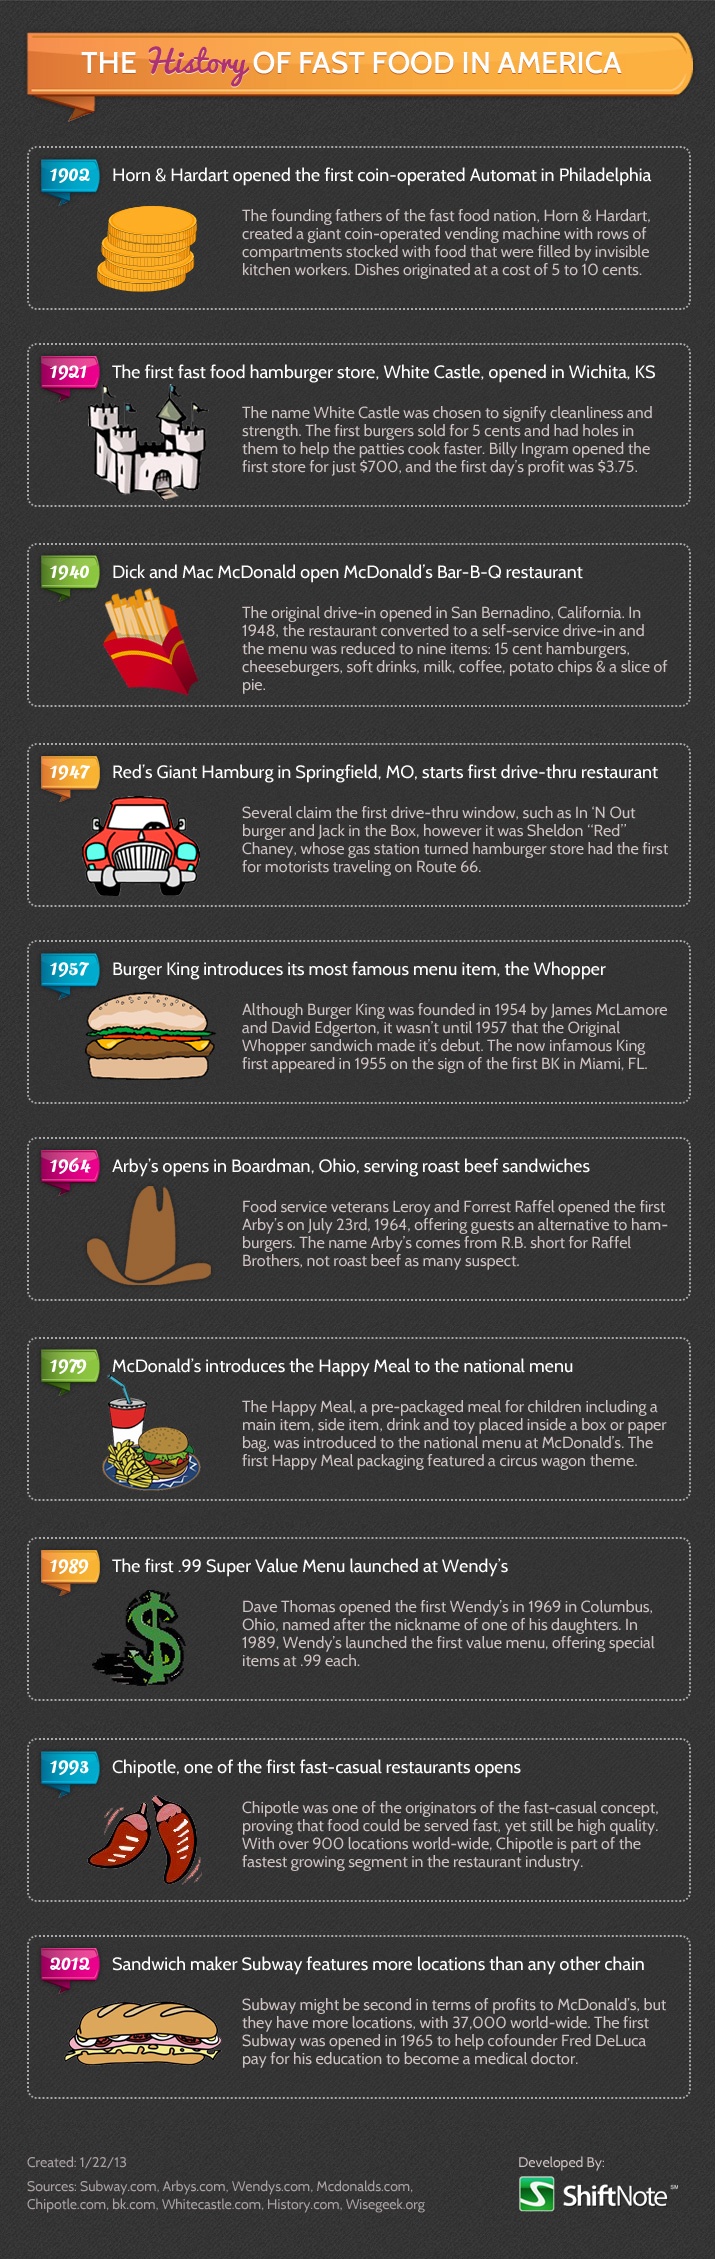 the history of fast food